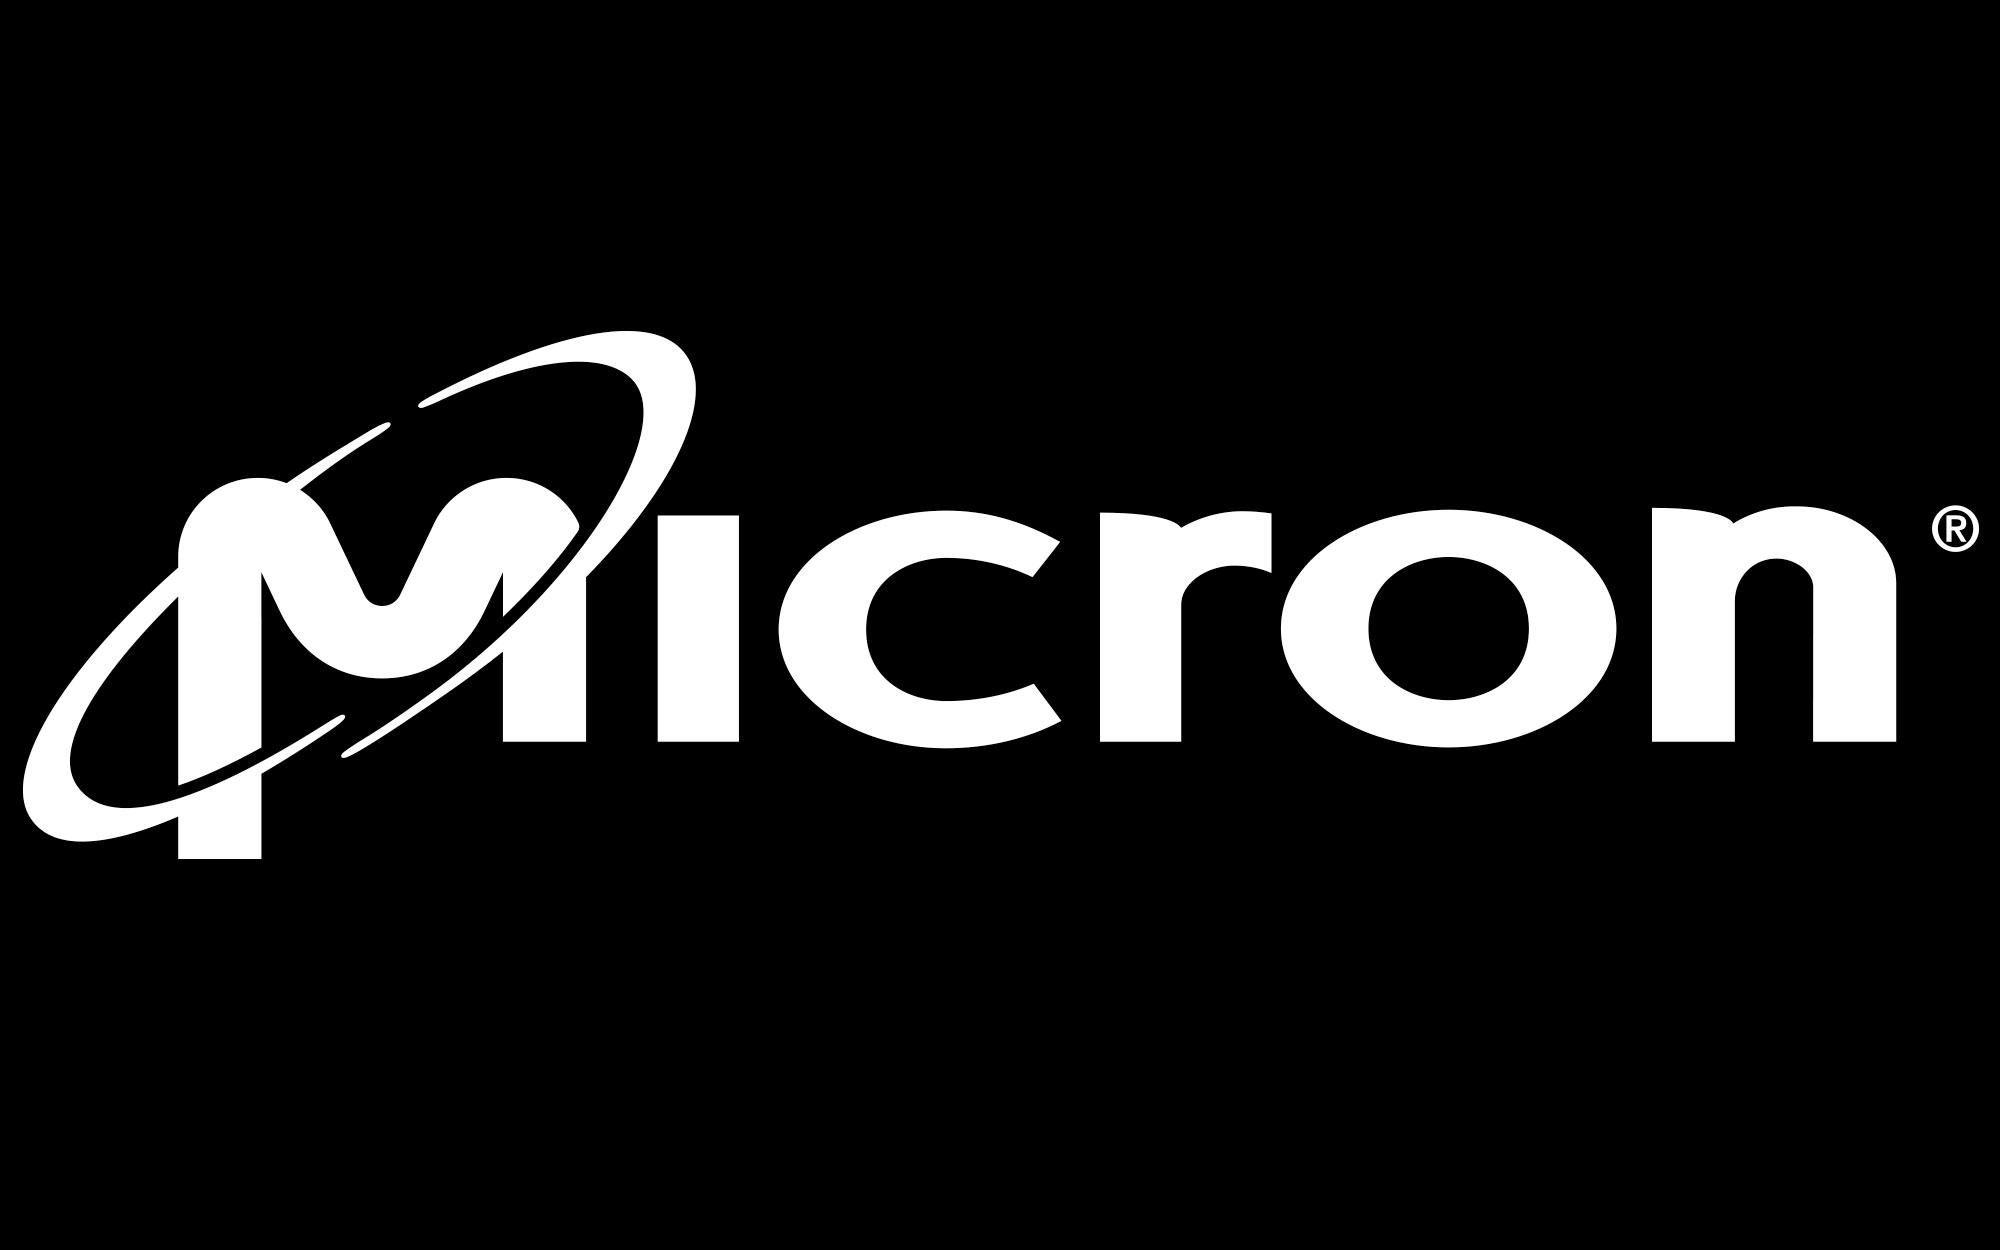 Micron Logo - What Were Institutions Up To With Micron Technology? - Micron ...